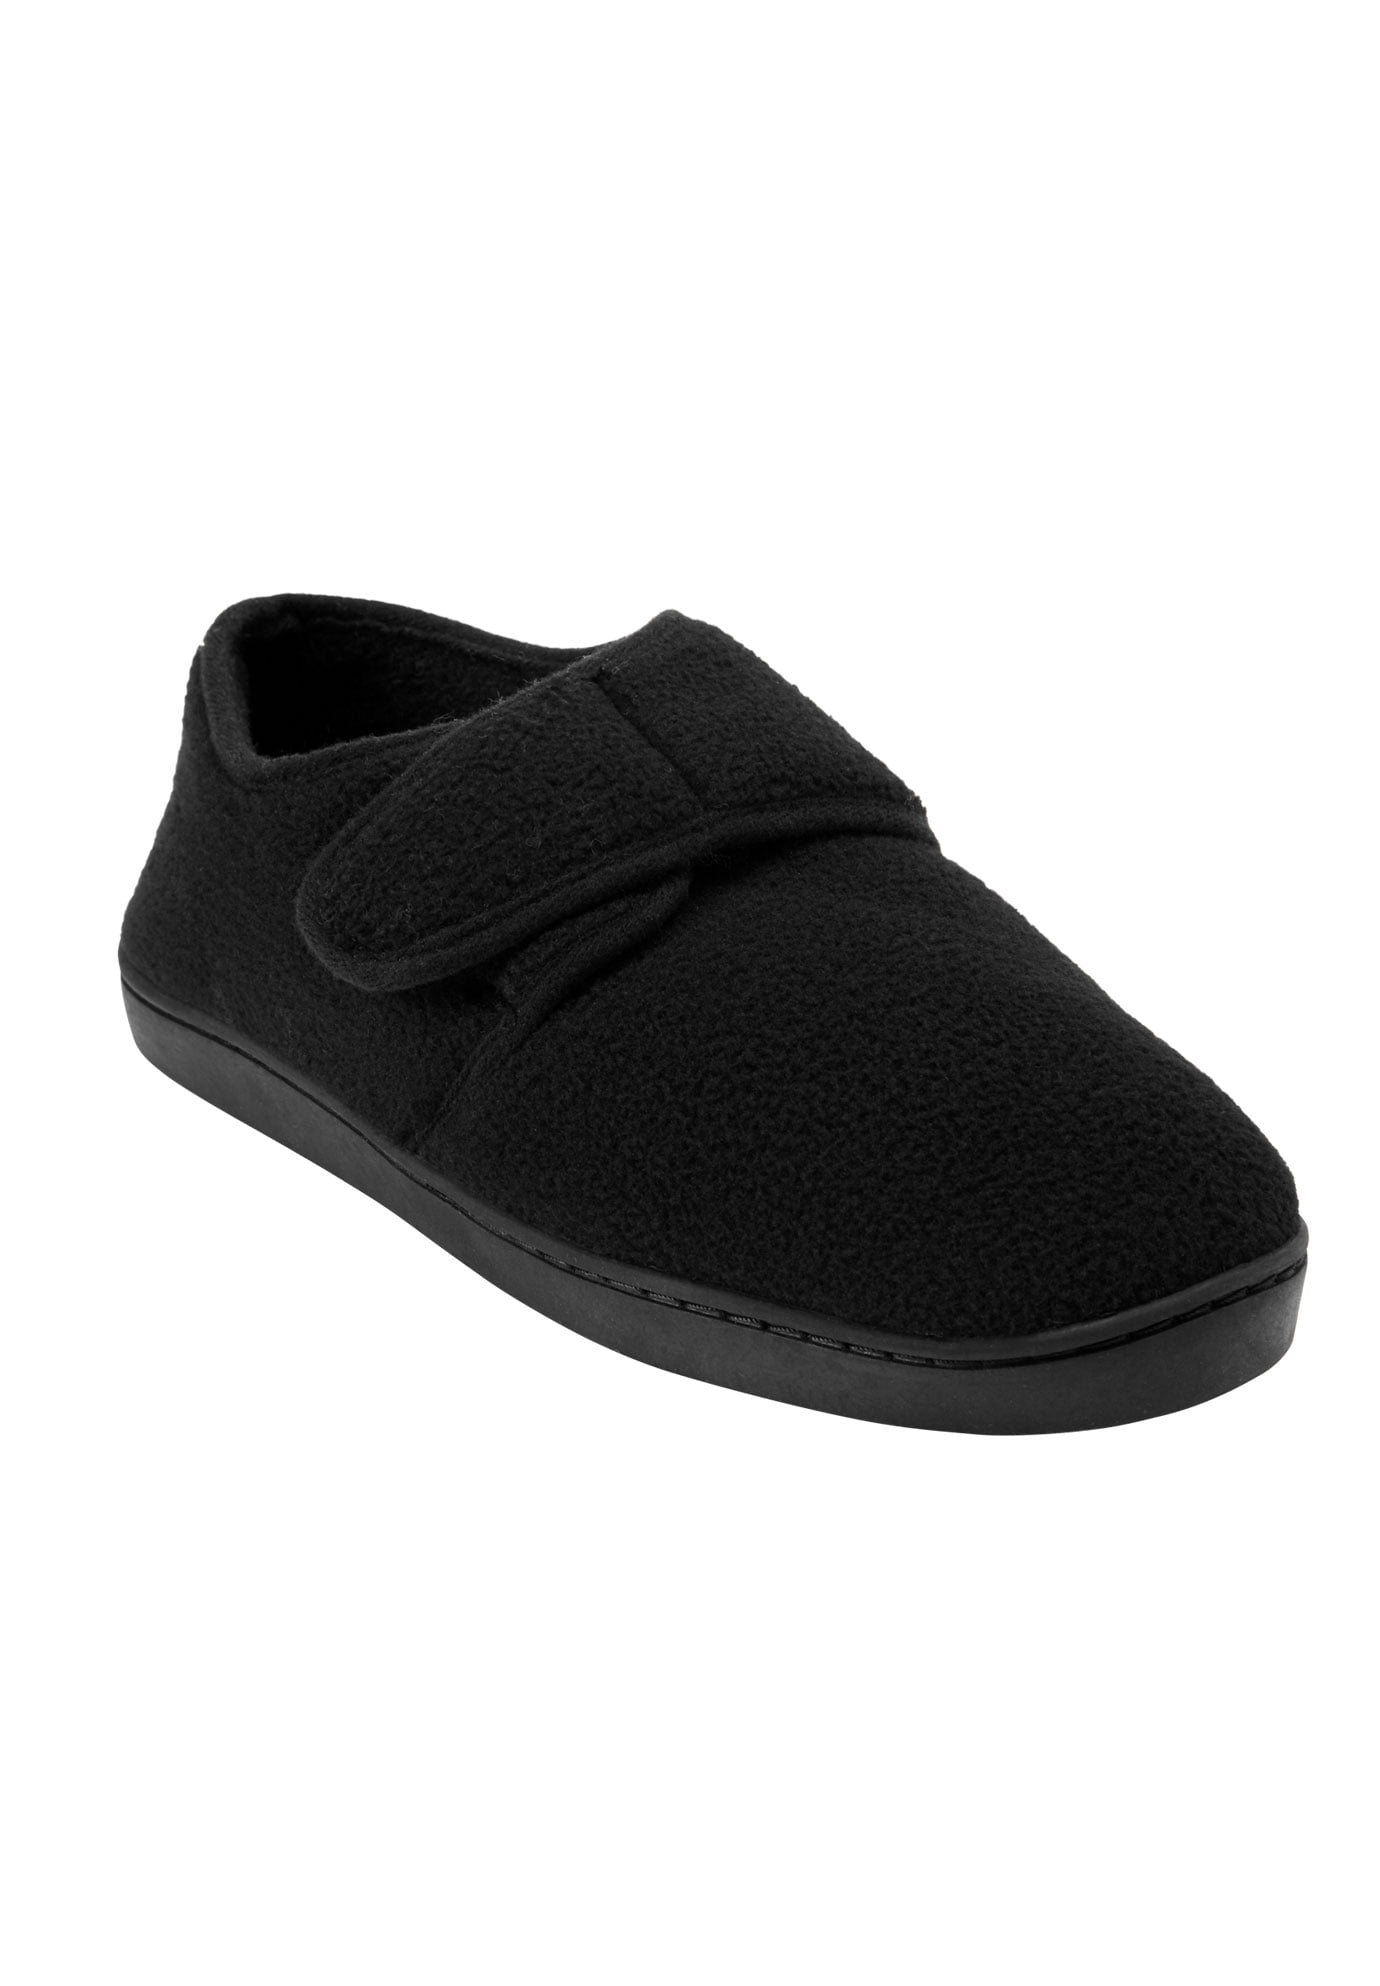 velcro slippers wide fit